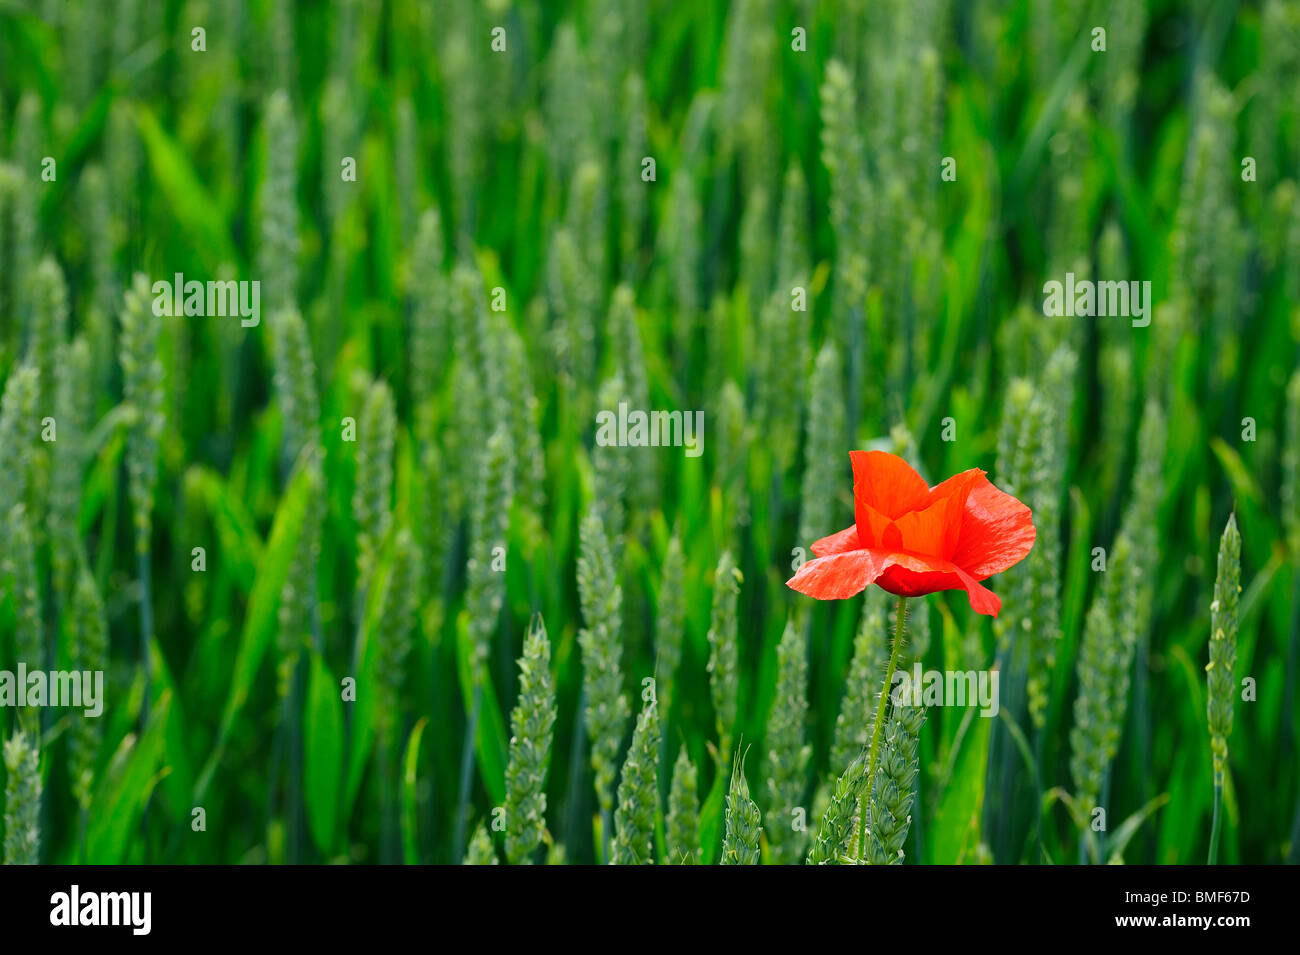 Individual - A solitary poppy growing in a regimented field of wheat. Stock Photo